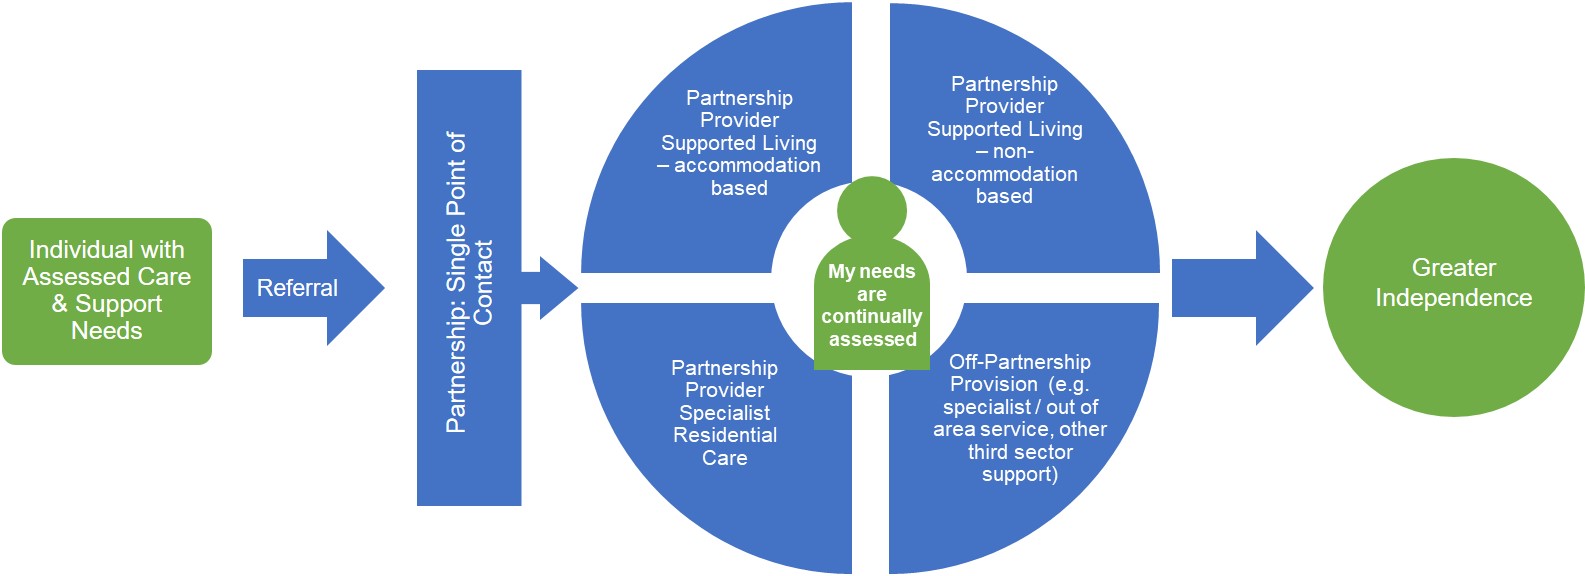 The proposed care pathway